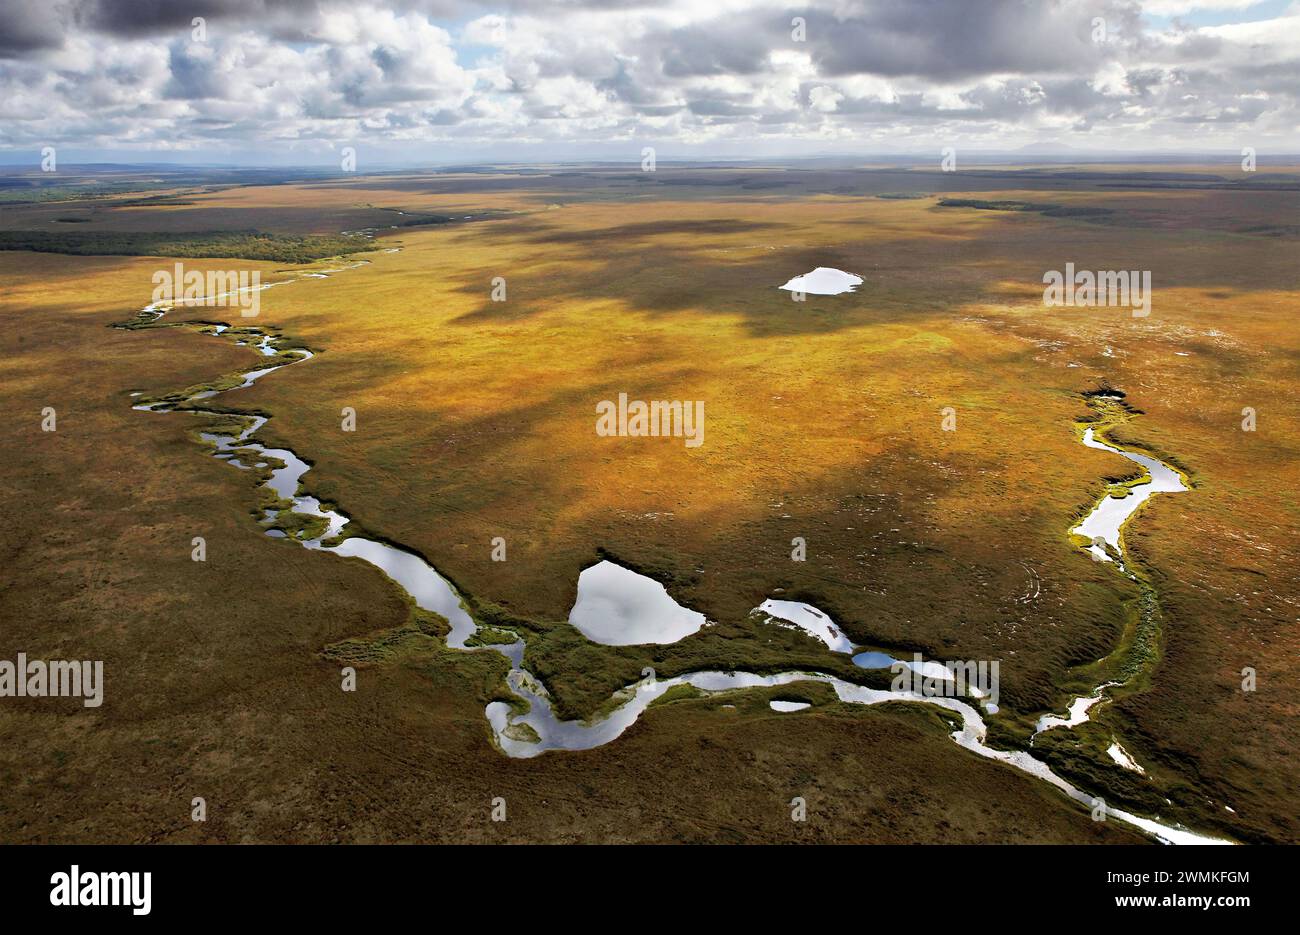 Braided river ecosystem snakes through the tundra and is used by salmon spawning.  Salmon bring marine-derived nutrients from the Kamchatka shelf i... Stock Photo